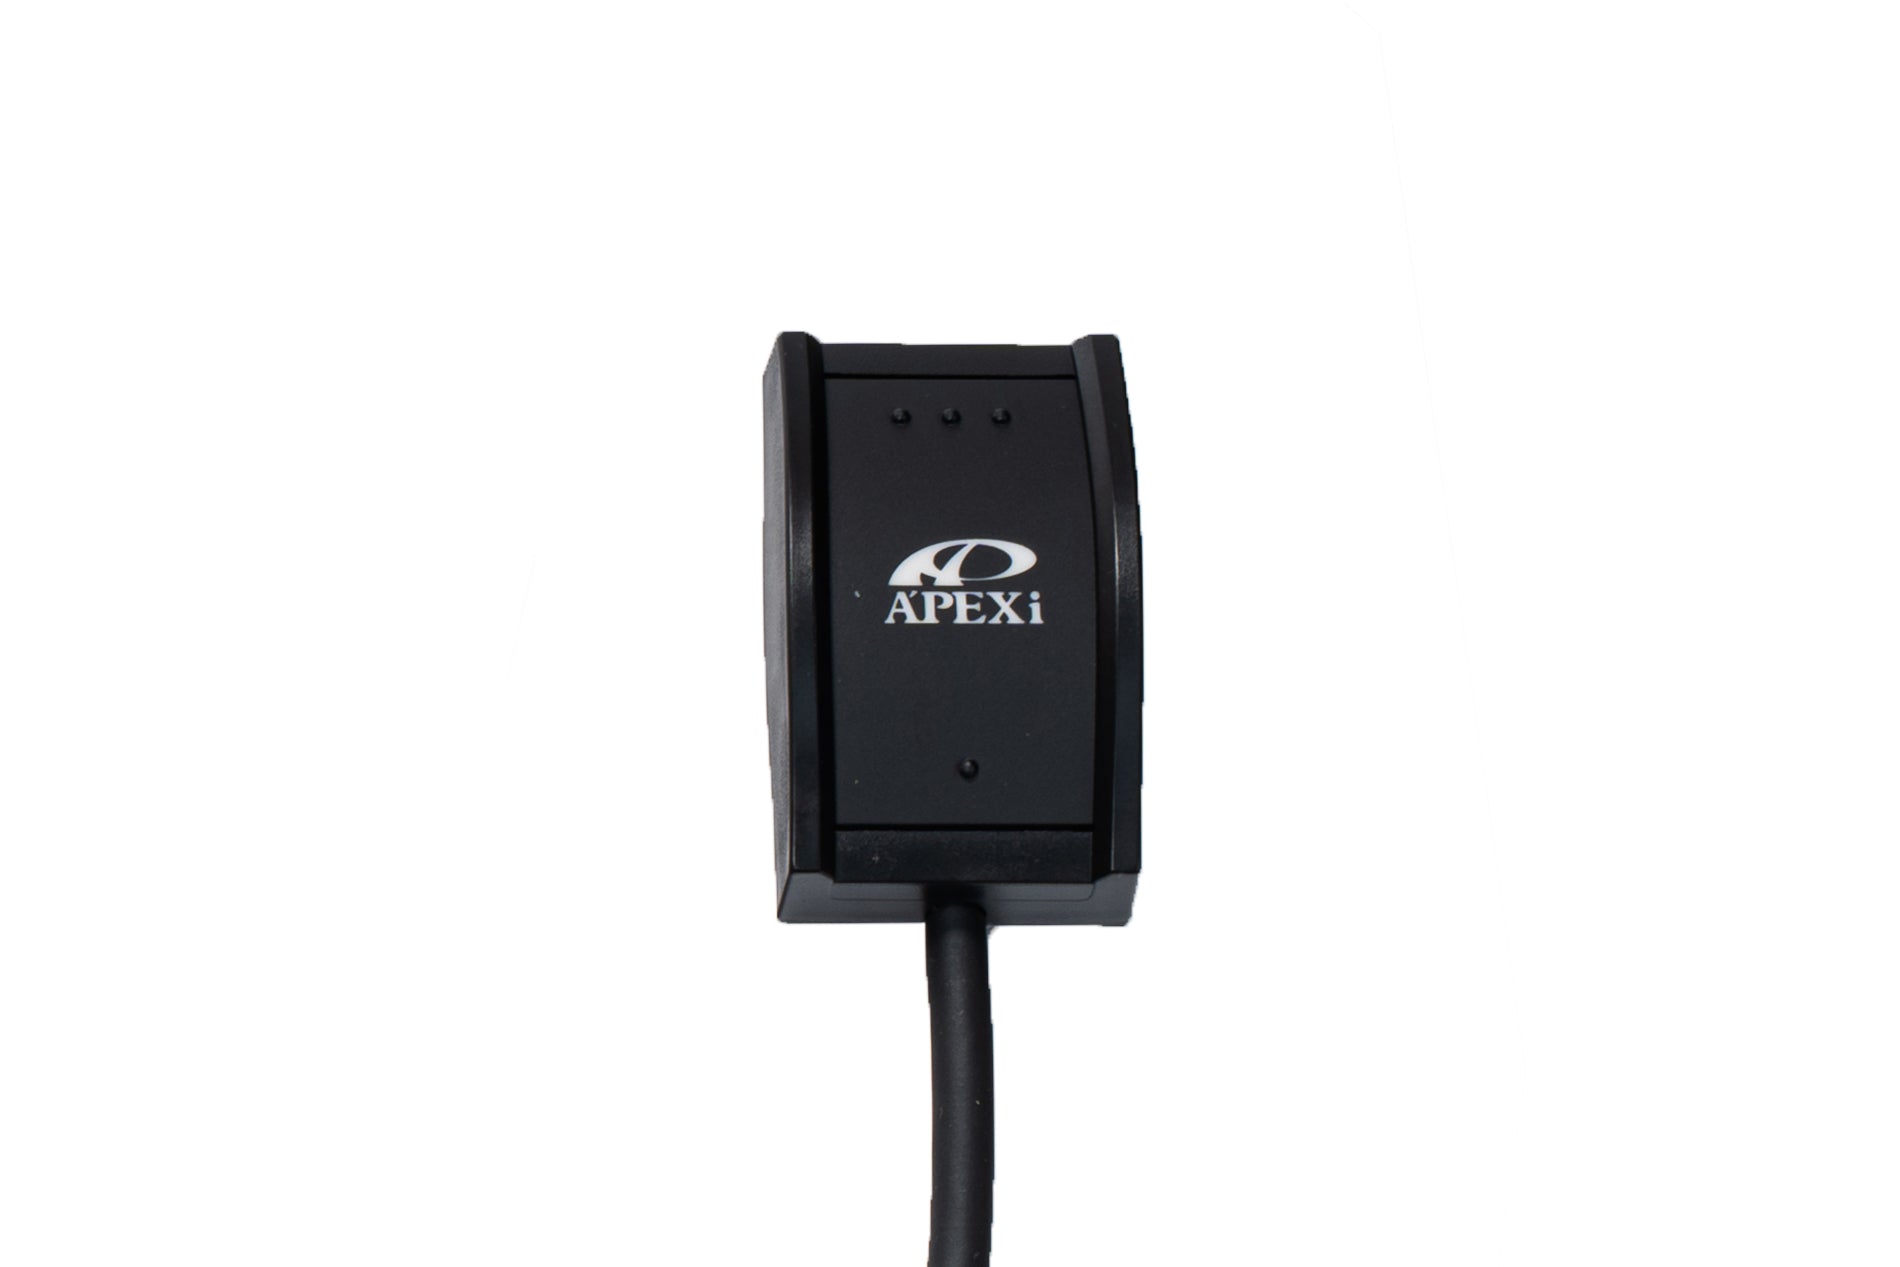 APEXi - Electronics, SMART Accel Controller with Harness  ** IN STOCK **